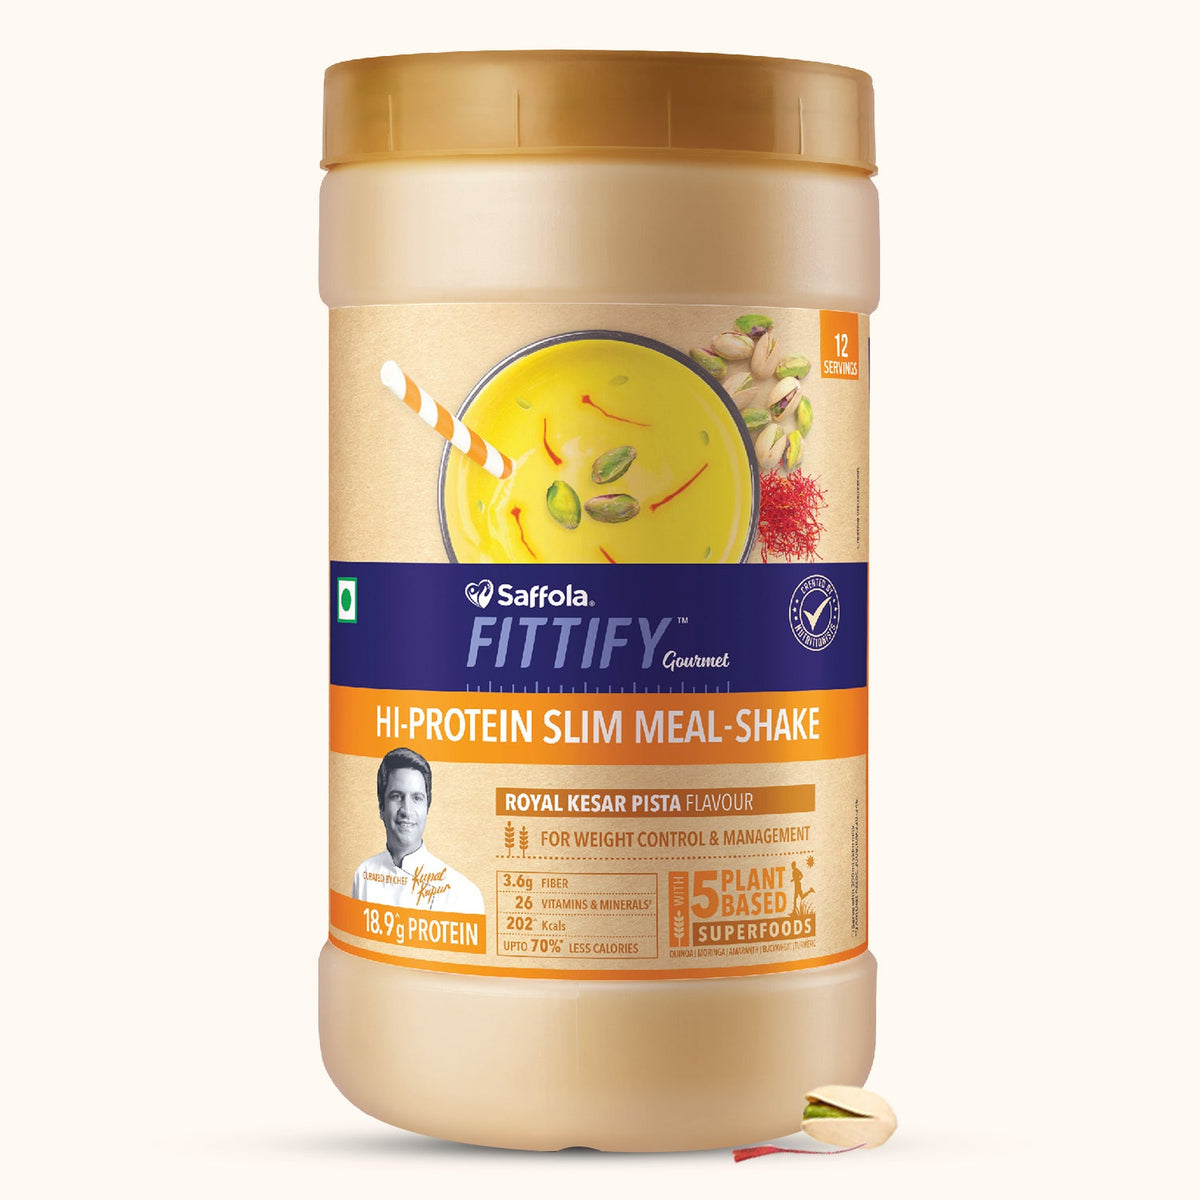 [CRED] Saffola Fittify Hi-Protein Slim Meal Shake - Royal Kesar Pista - Pack of 1 - 420g